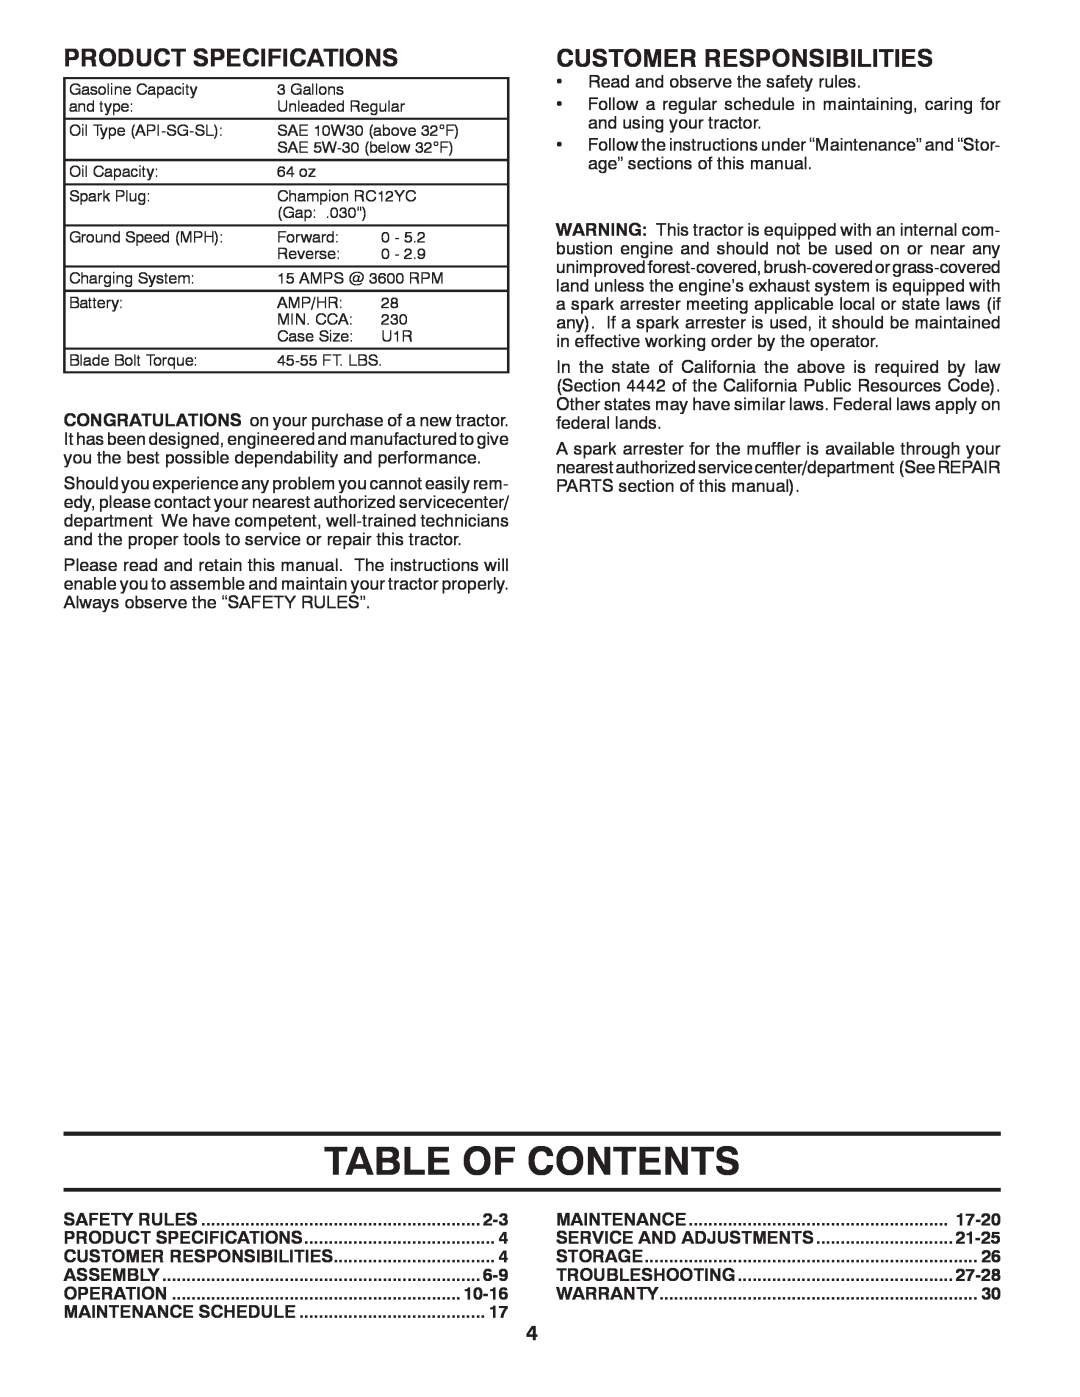 Dixon 435068 Table Of Contents, Product Specifications, Customer Responsibilities, 10-16, 17-20, Service And Adjustments 